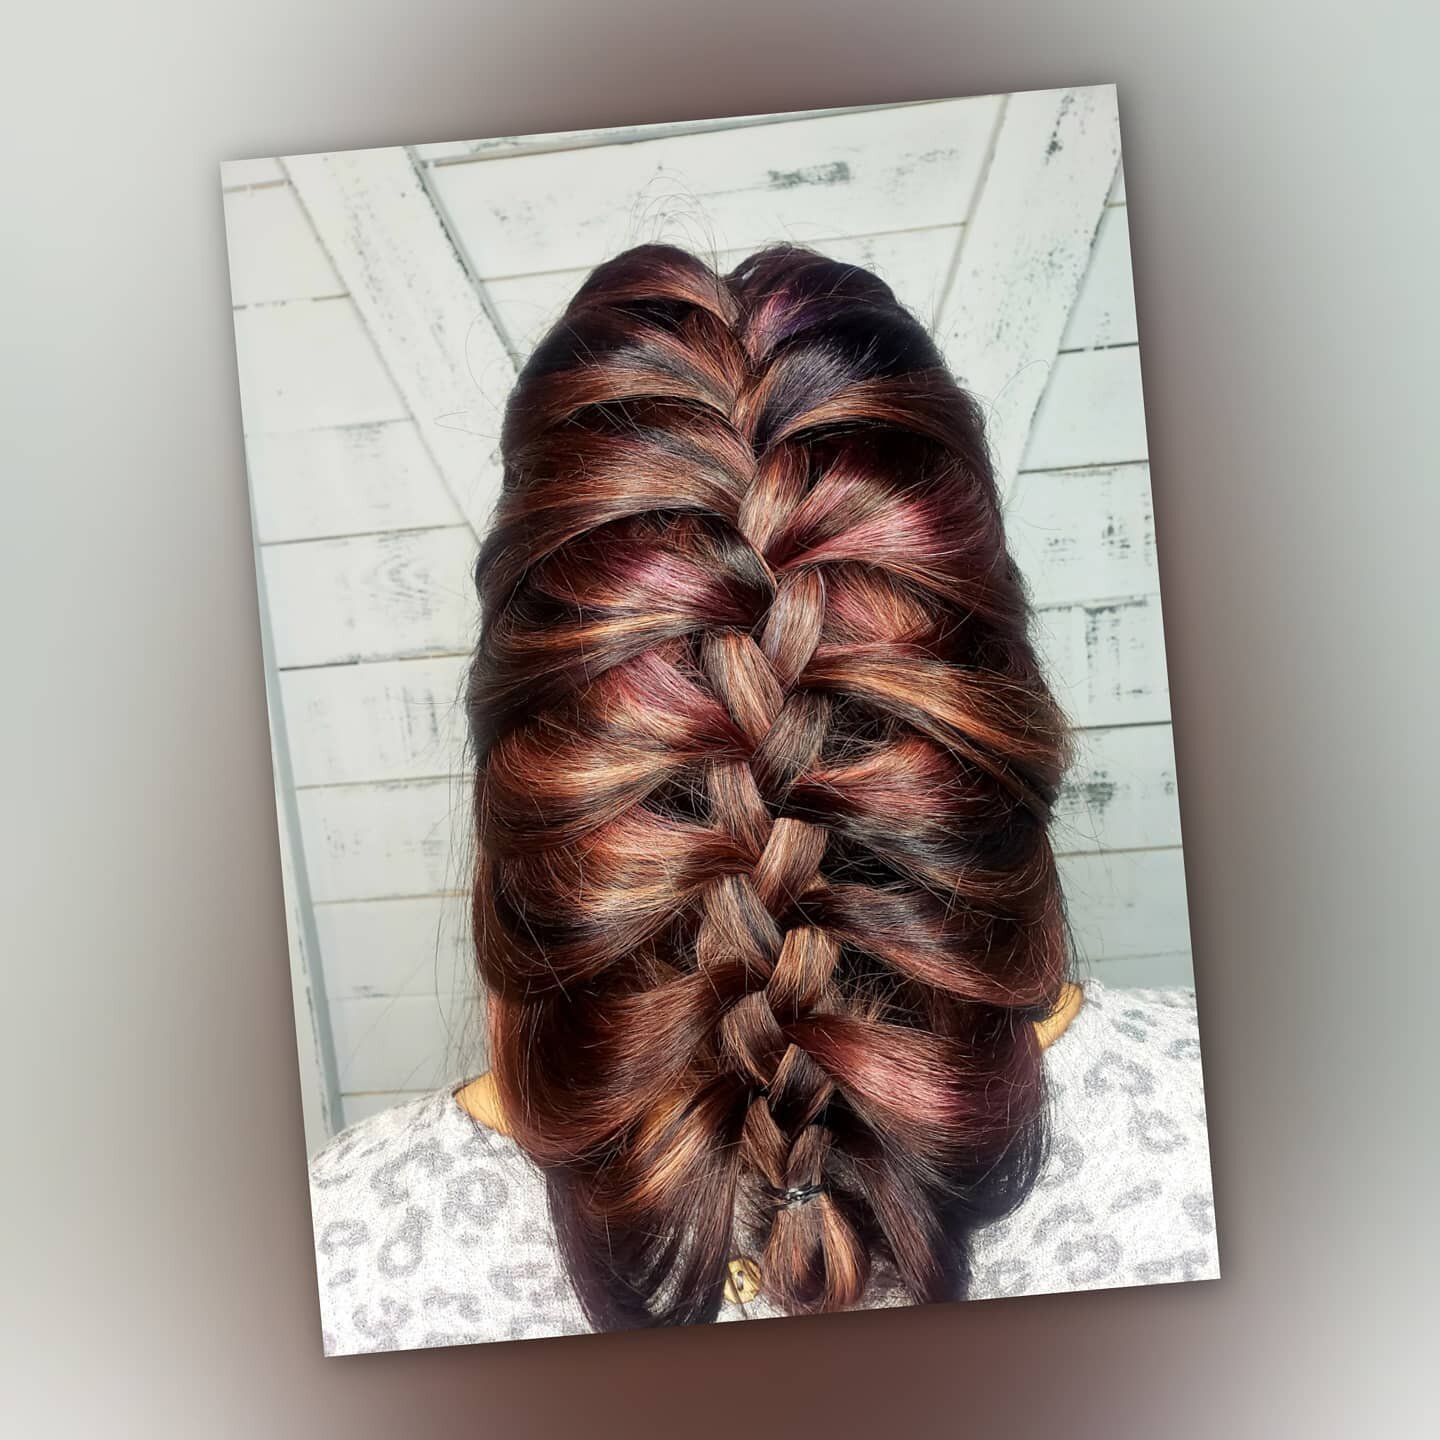 I love a good braid to show off the dimensional color 😍 we did in this lovely lady 🤩
♡♡♡♡♡♡♡♡♡♡♡♡
#salon66 #arvadasalon #salon66tribe #braids #coloradolife #5280